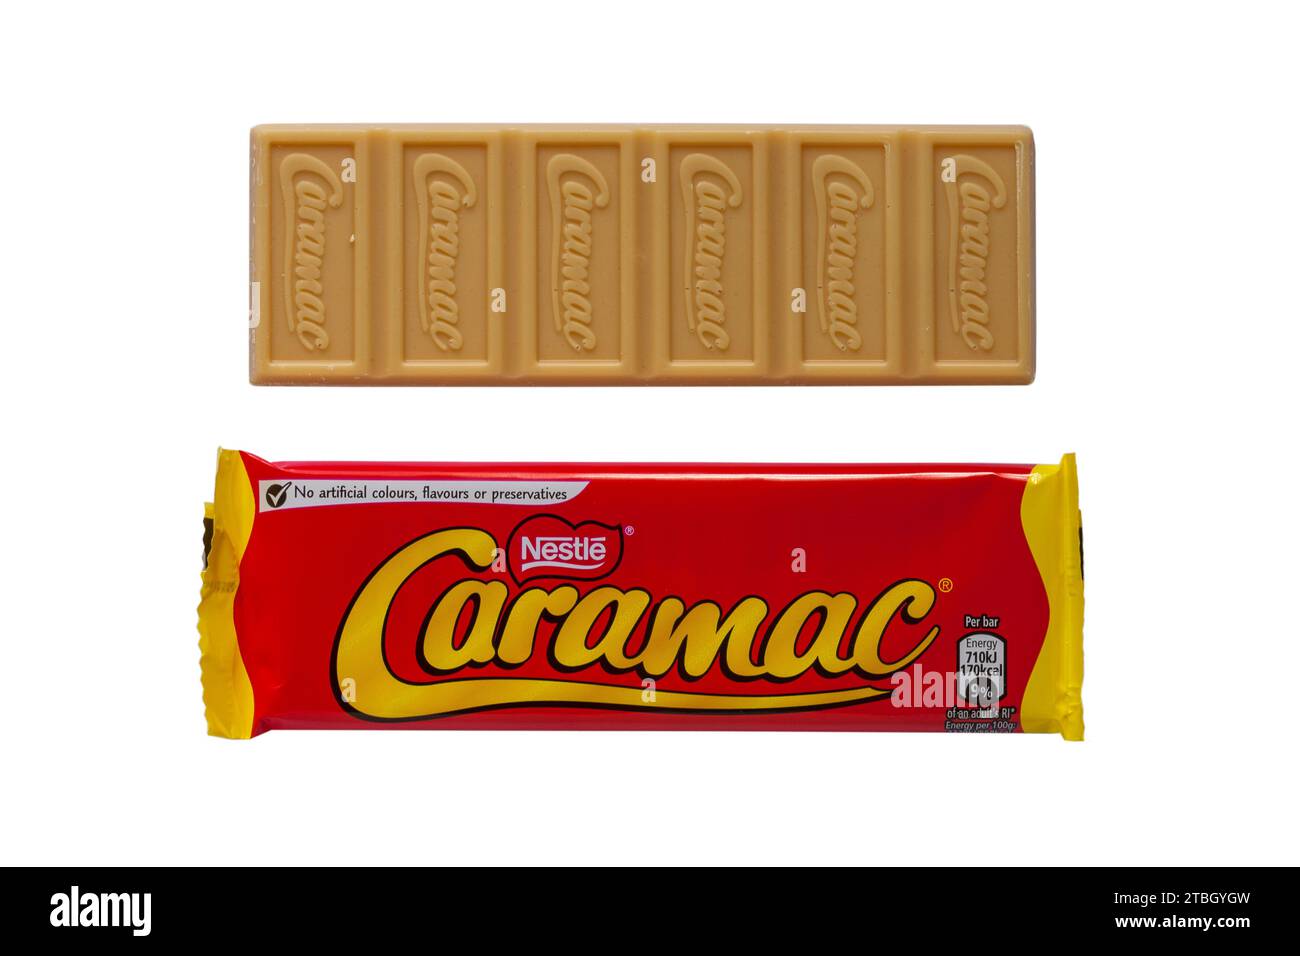 bar of Nestle Caramac chocolate removed to show contents isolated on white background - looking down on from above - The Caramel Flavour bar Stock Photo